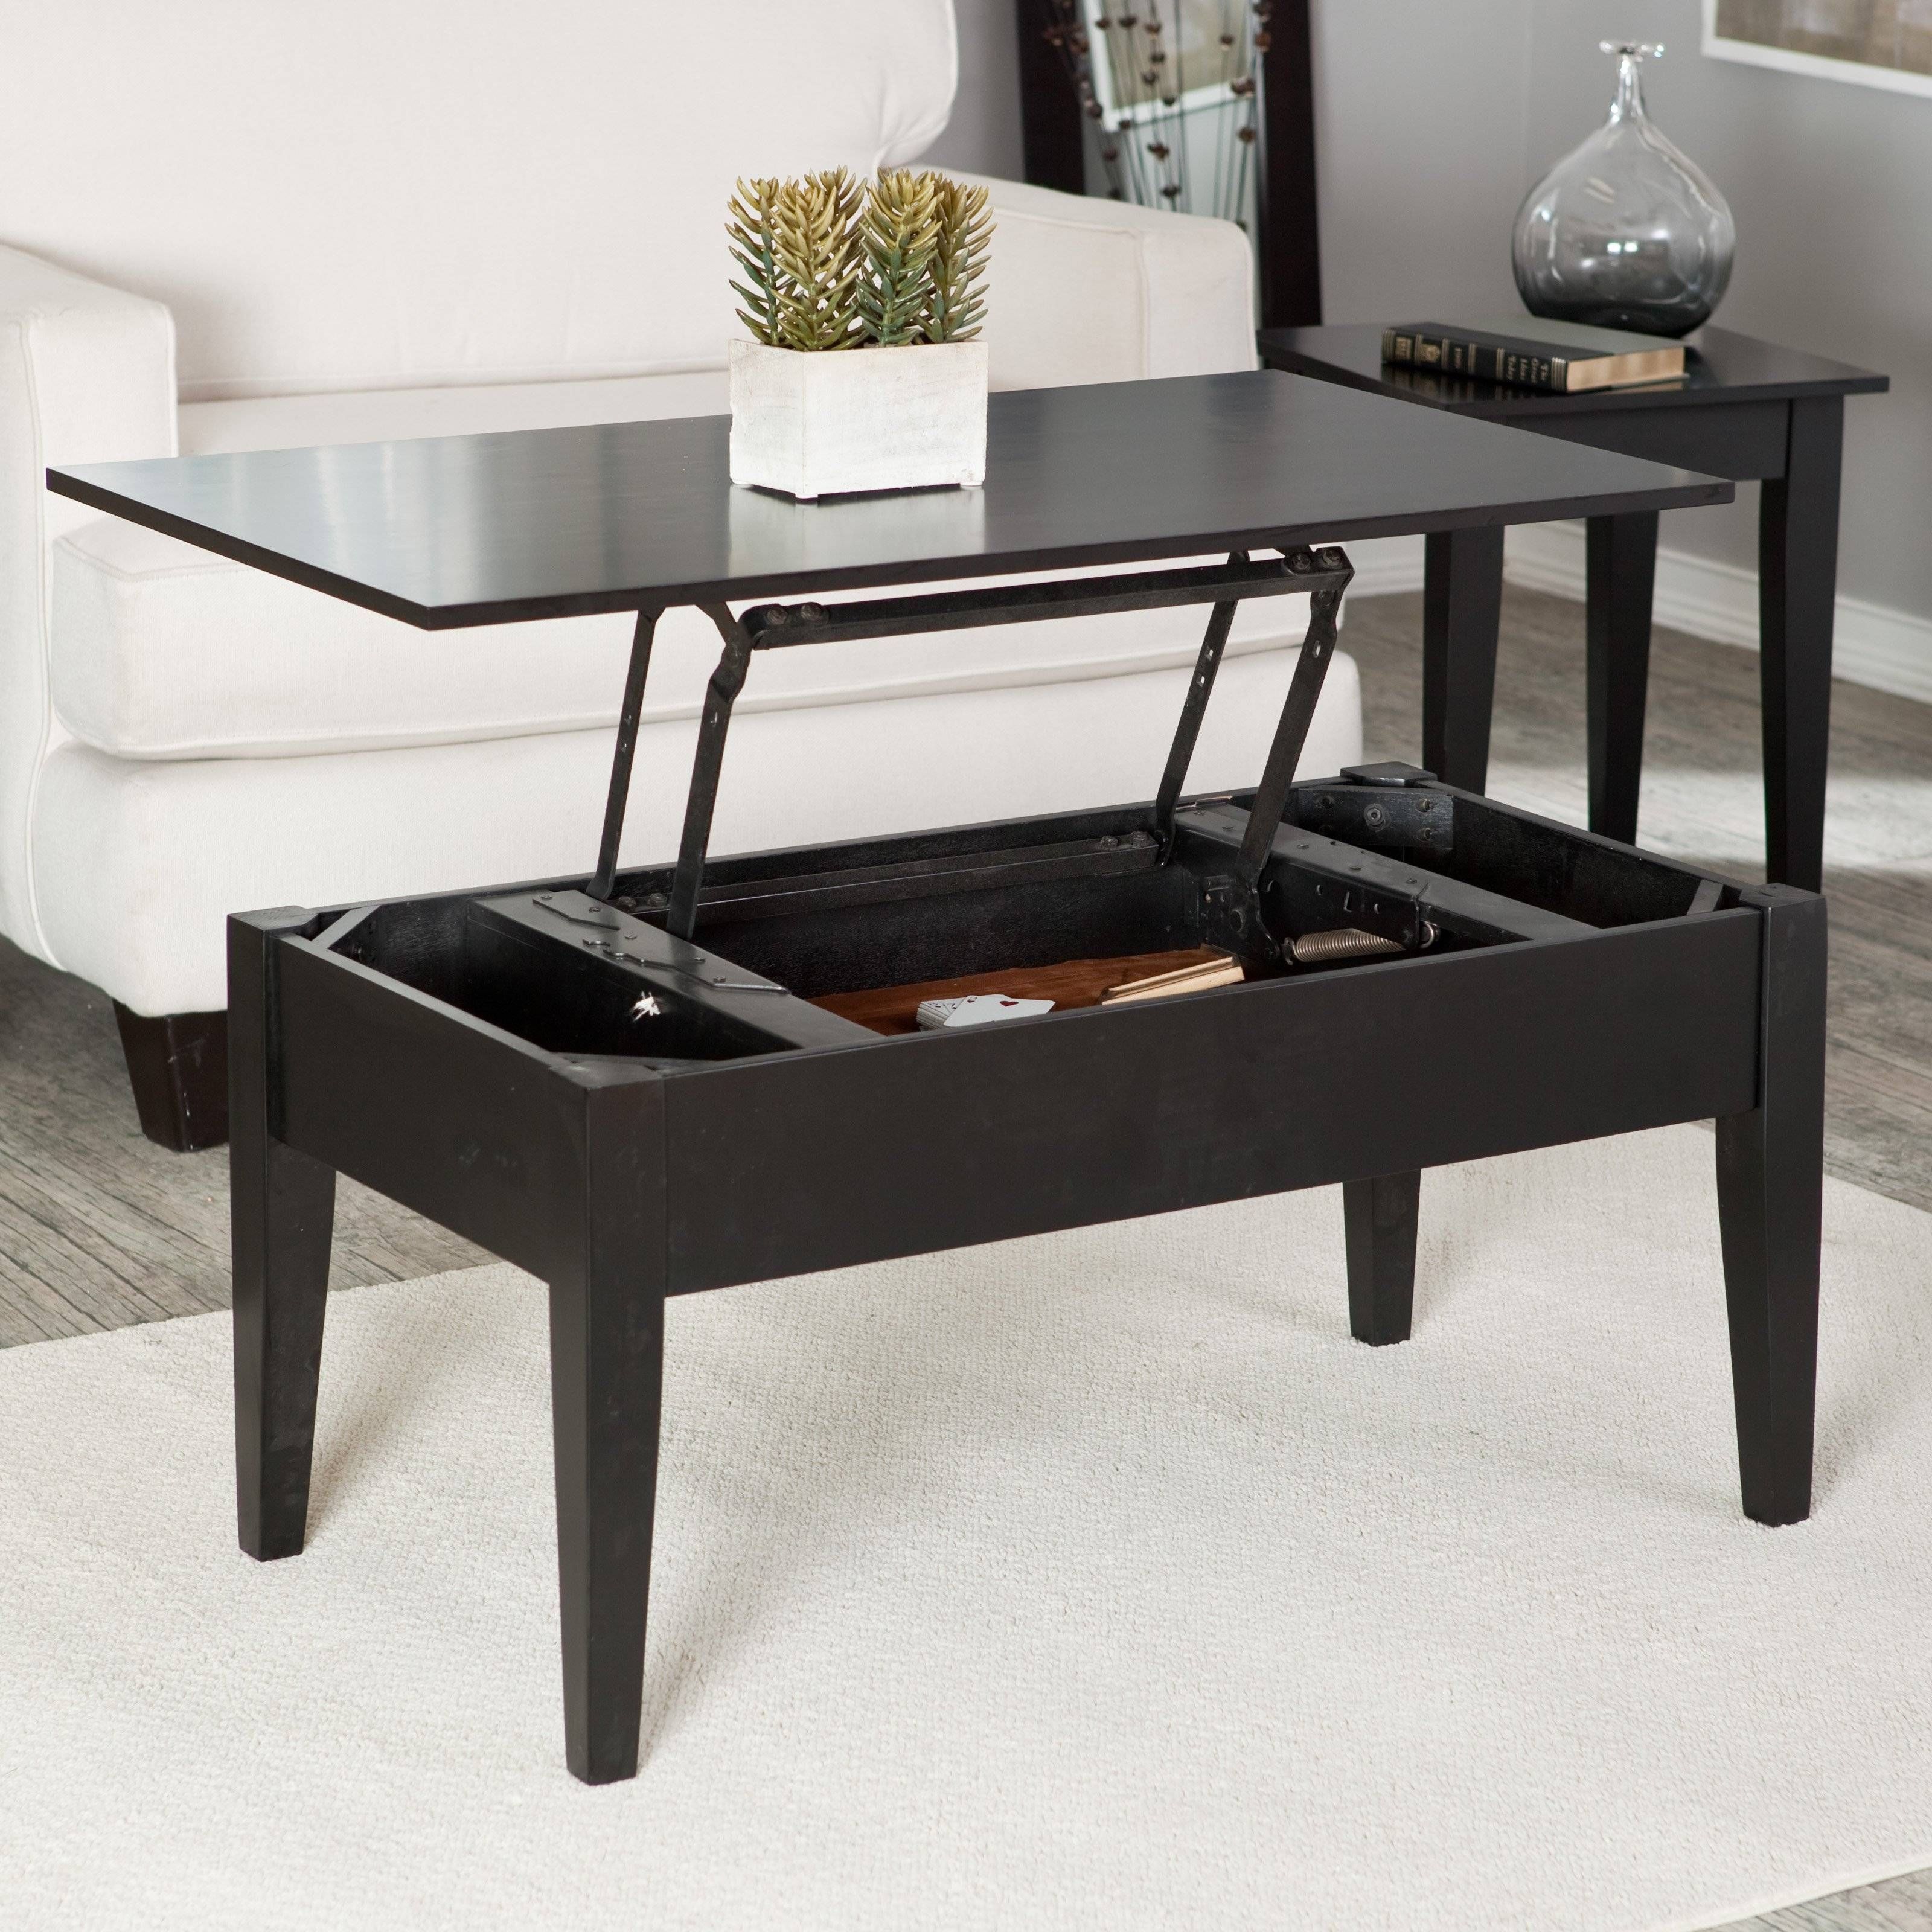 Turner Lift Top Coffee Table – Espresso | Hayneedle With Regard To Flip Up Coffee Tables (View 1 of 30)